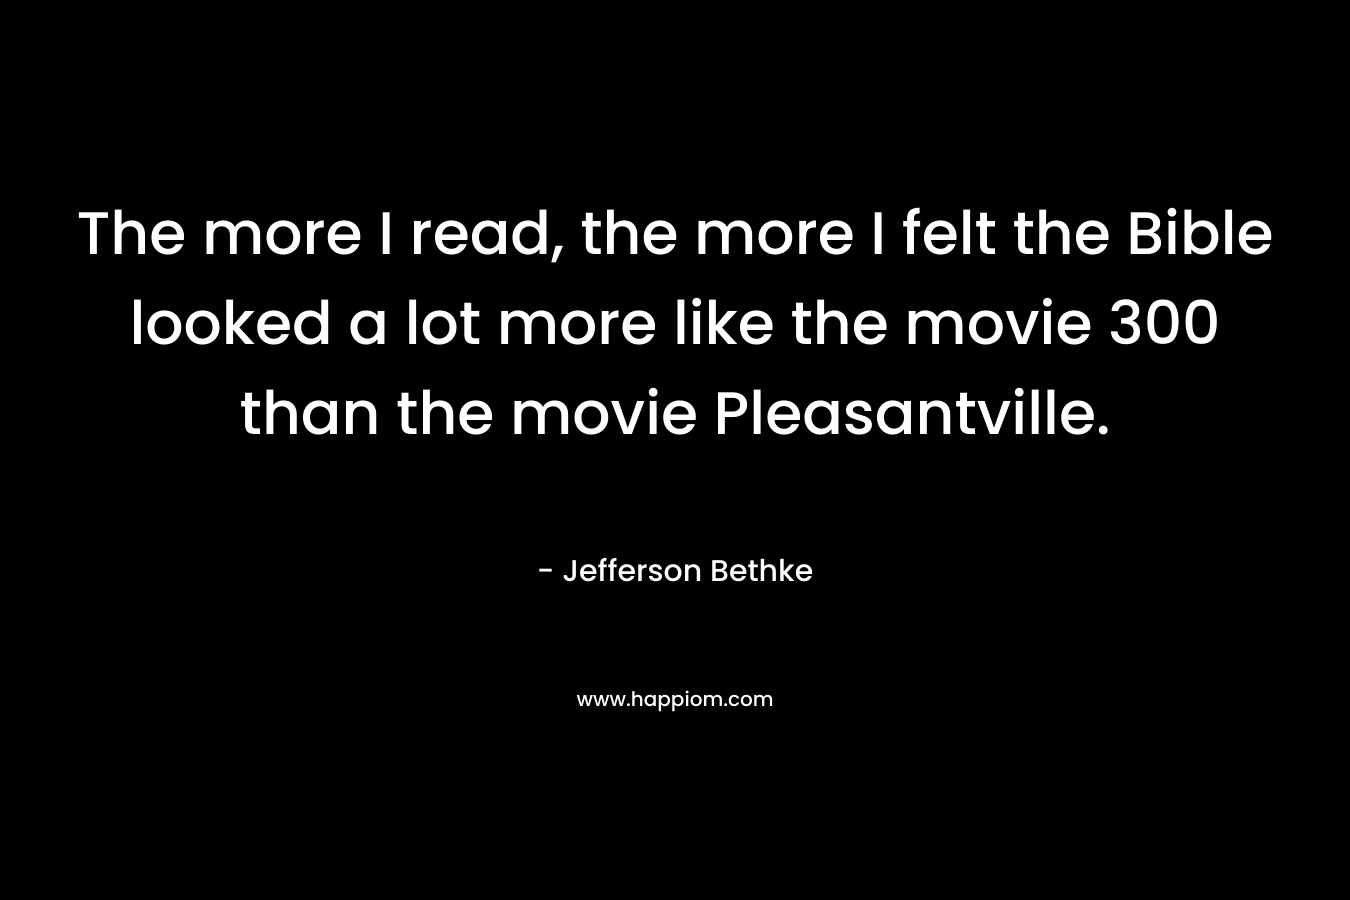 The more I read, the more I felt the Bible looked a lot more like the movie 300 than the movie Pleasantville.